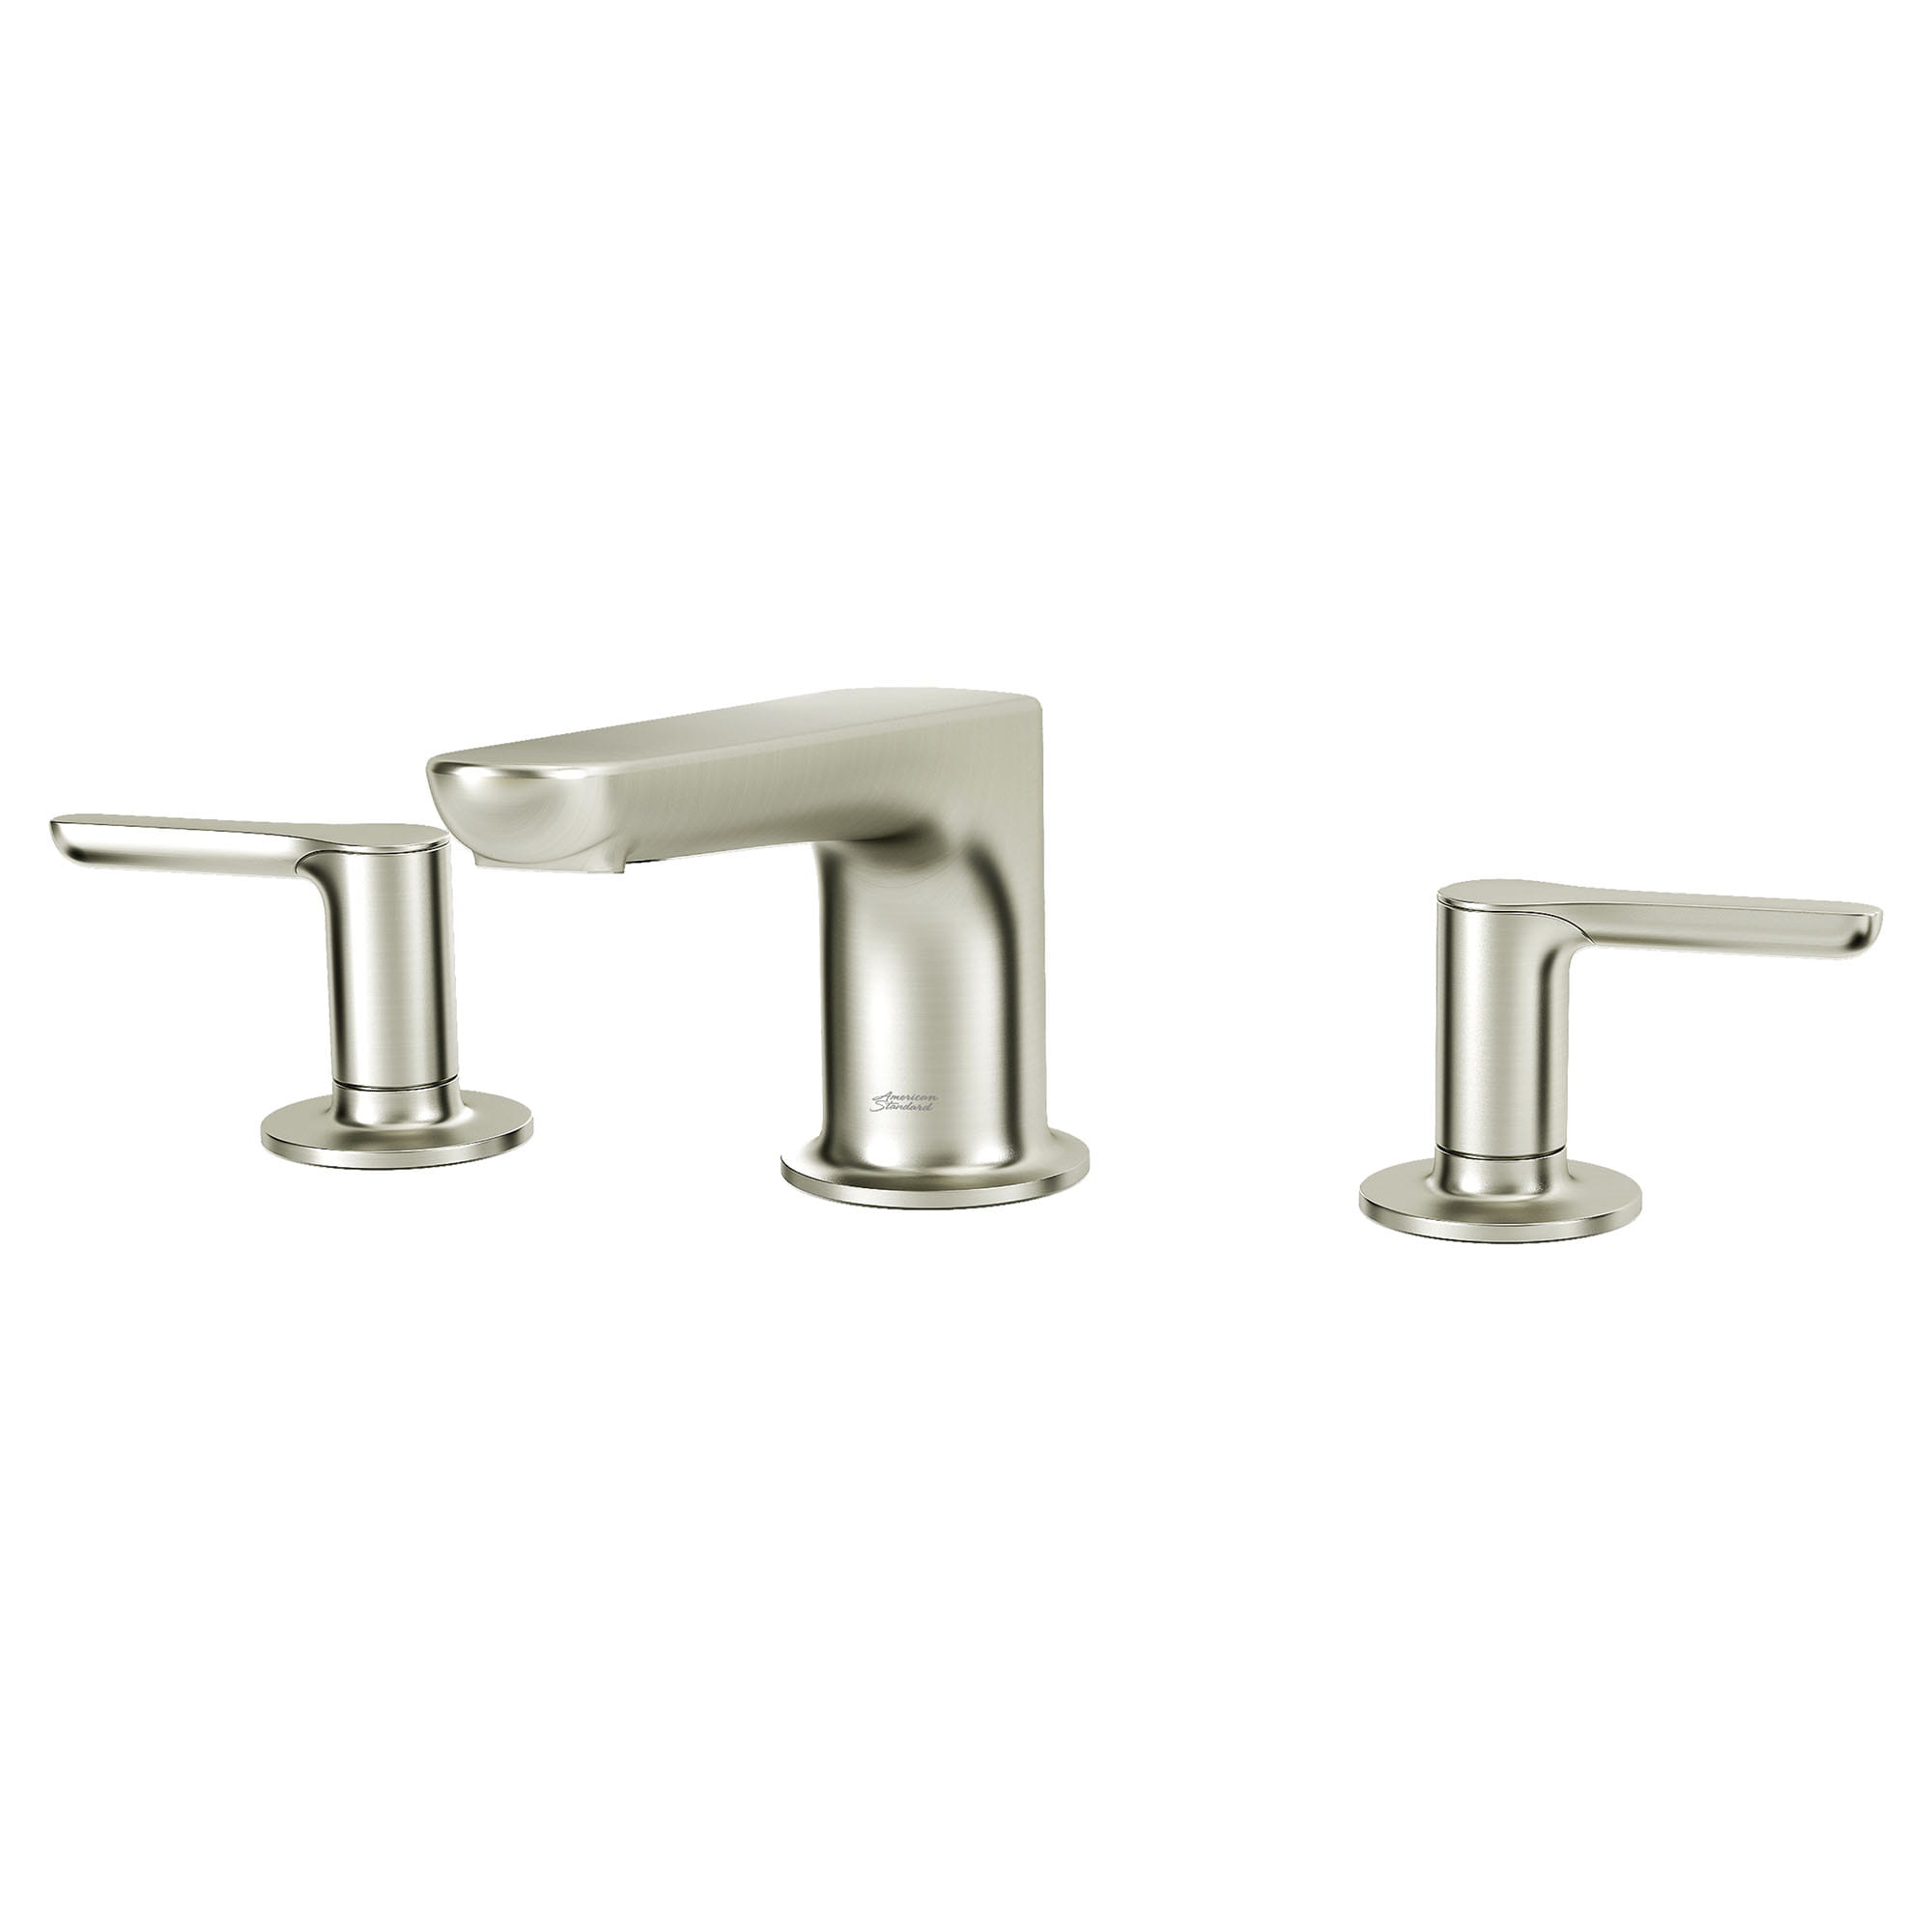 Studio® S Bathtub Faucet With Lever Handles for Flash® Rough-In Valve